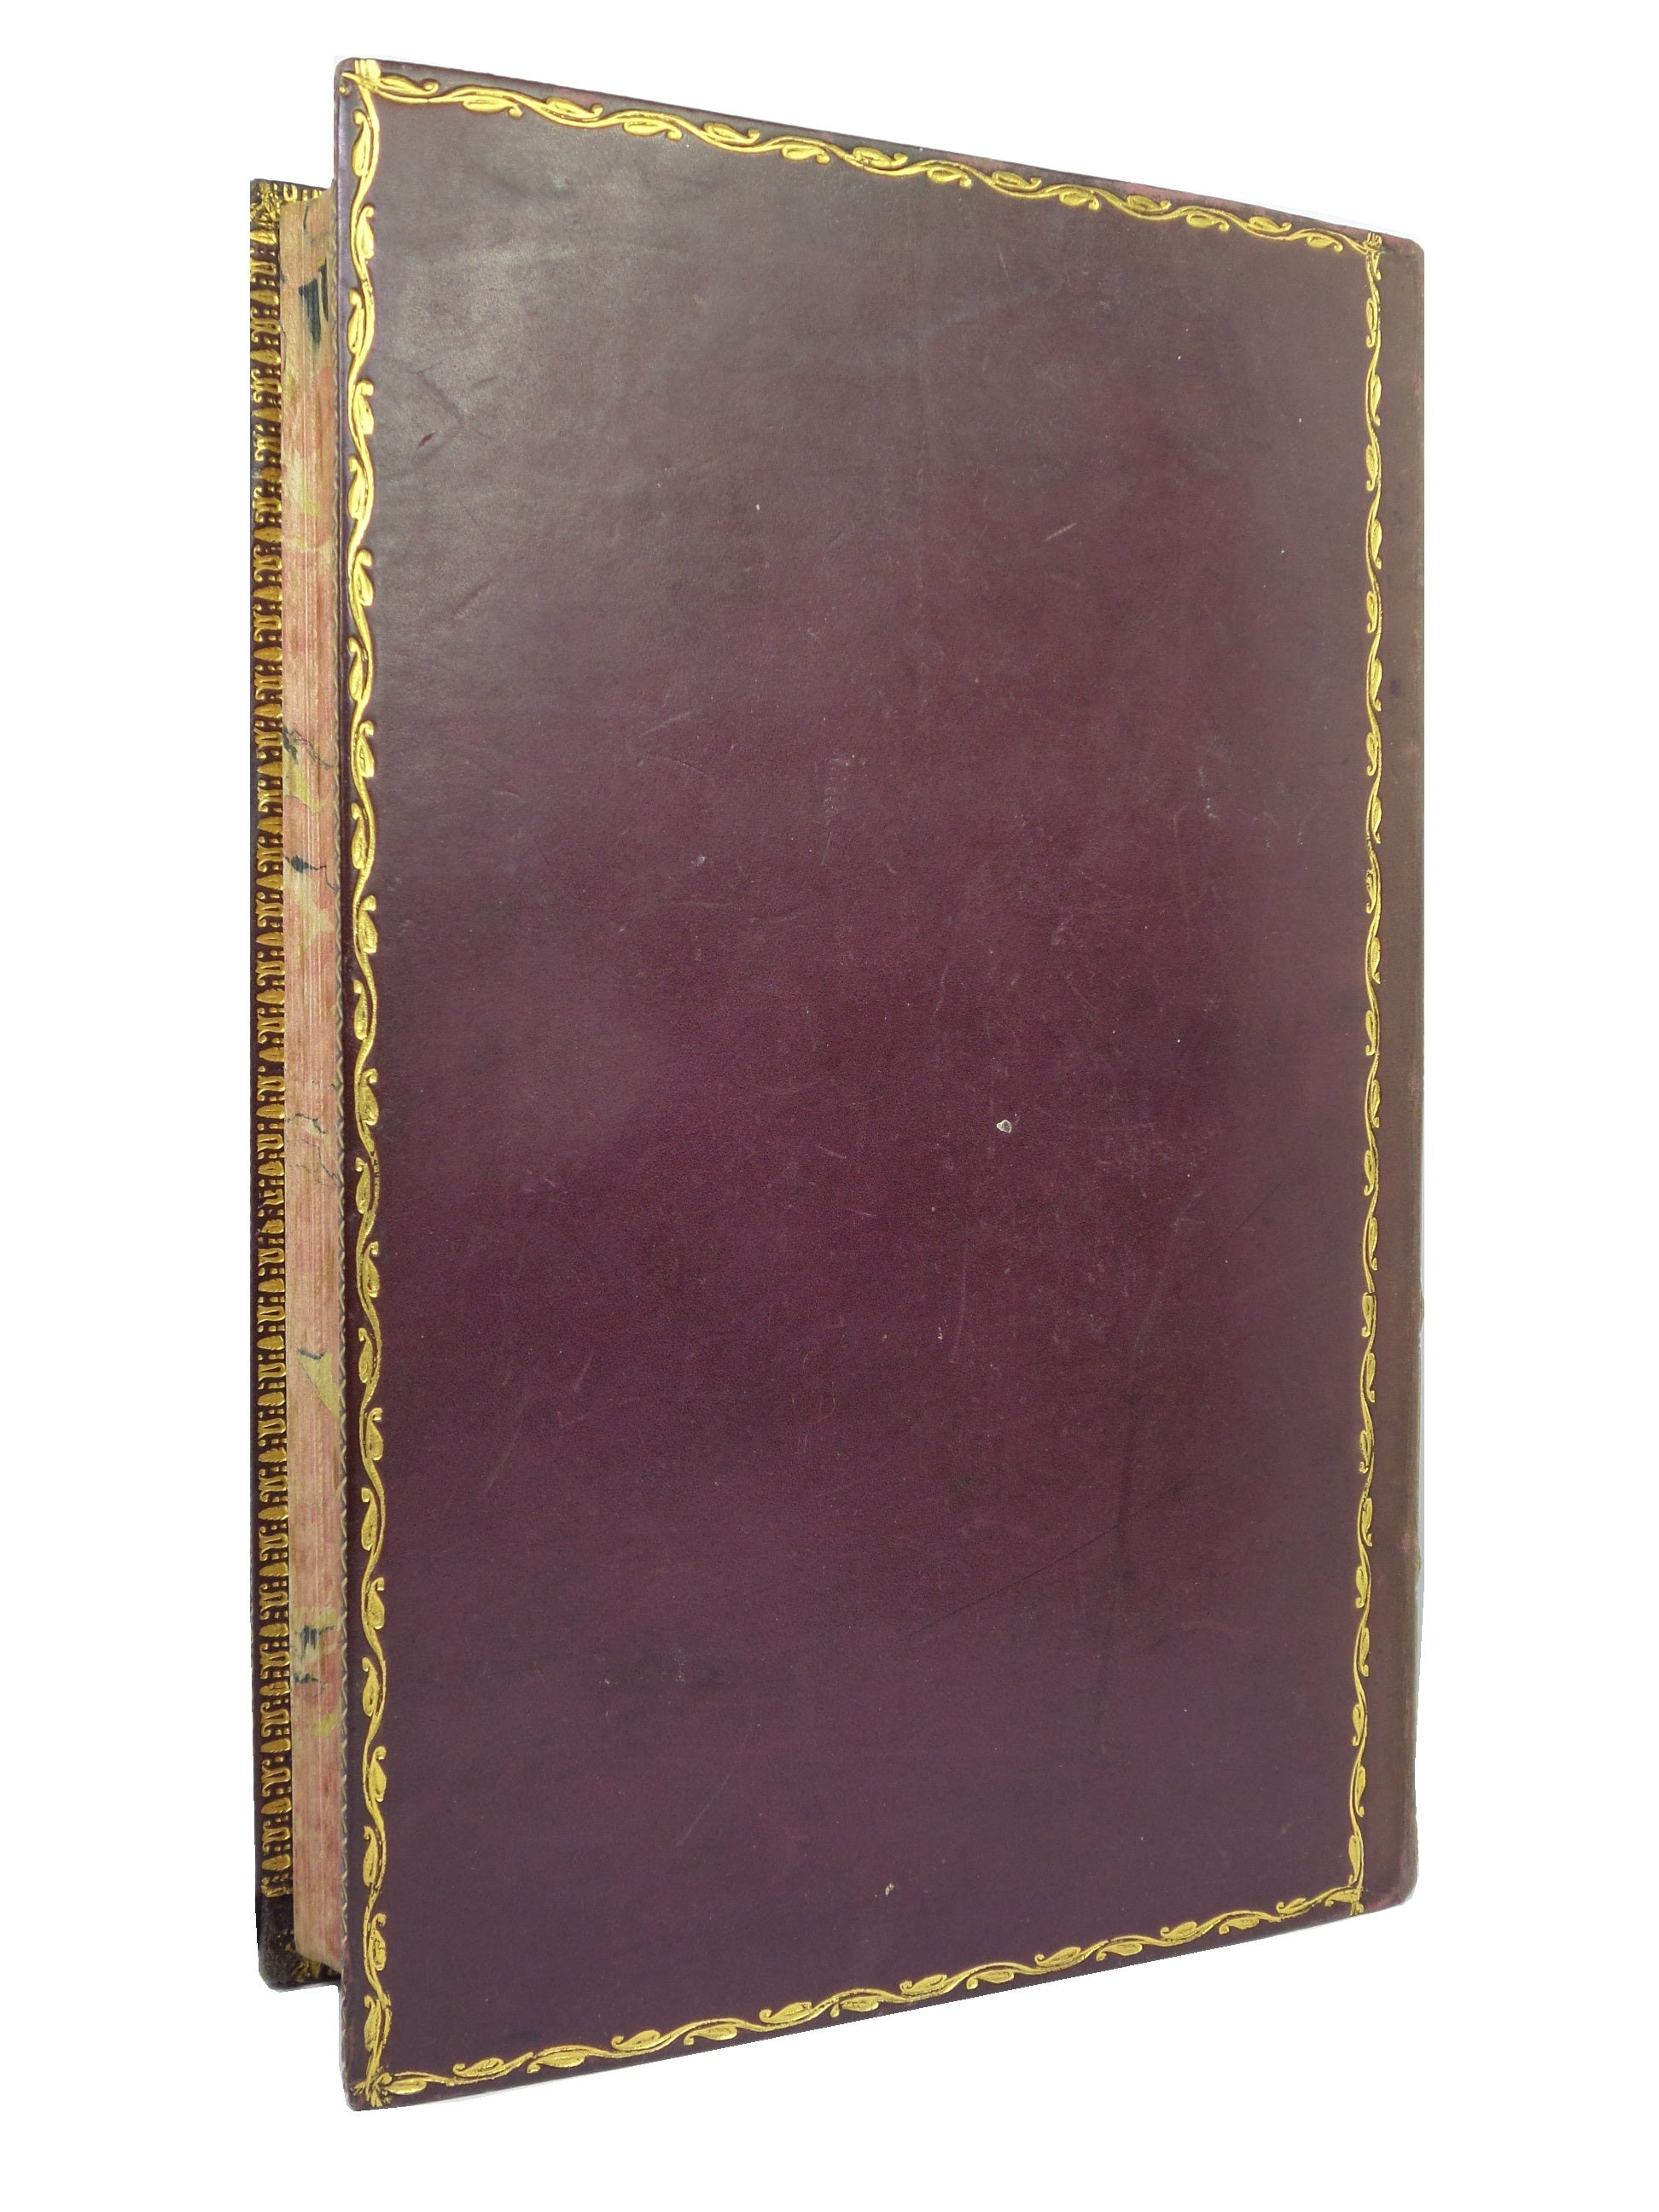 JOURNAL OF RESEARCHES BY CHARLES DARWIN 1912 FINE LEATHER BINDING